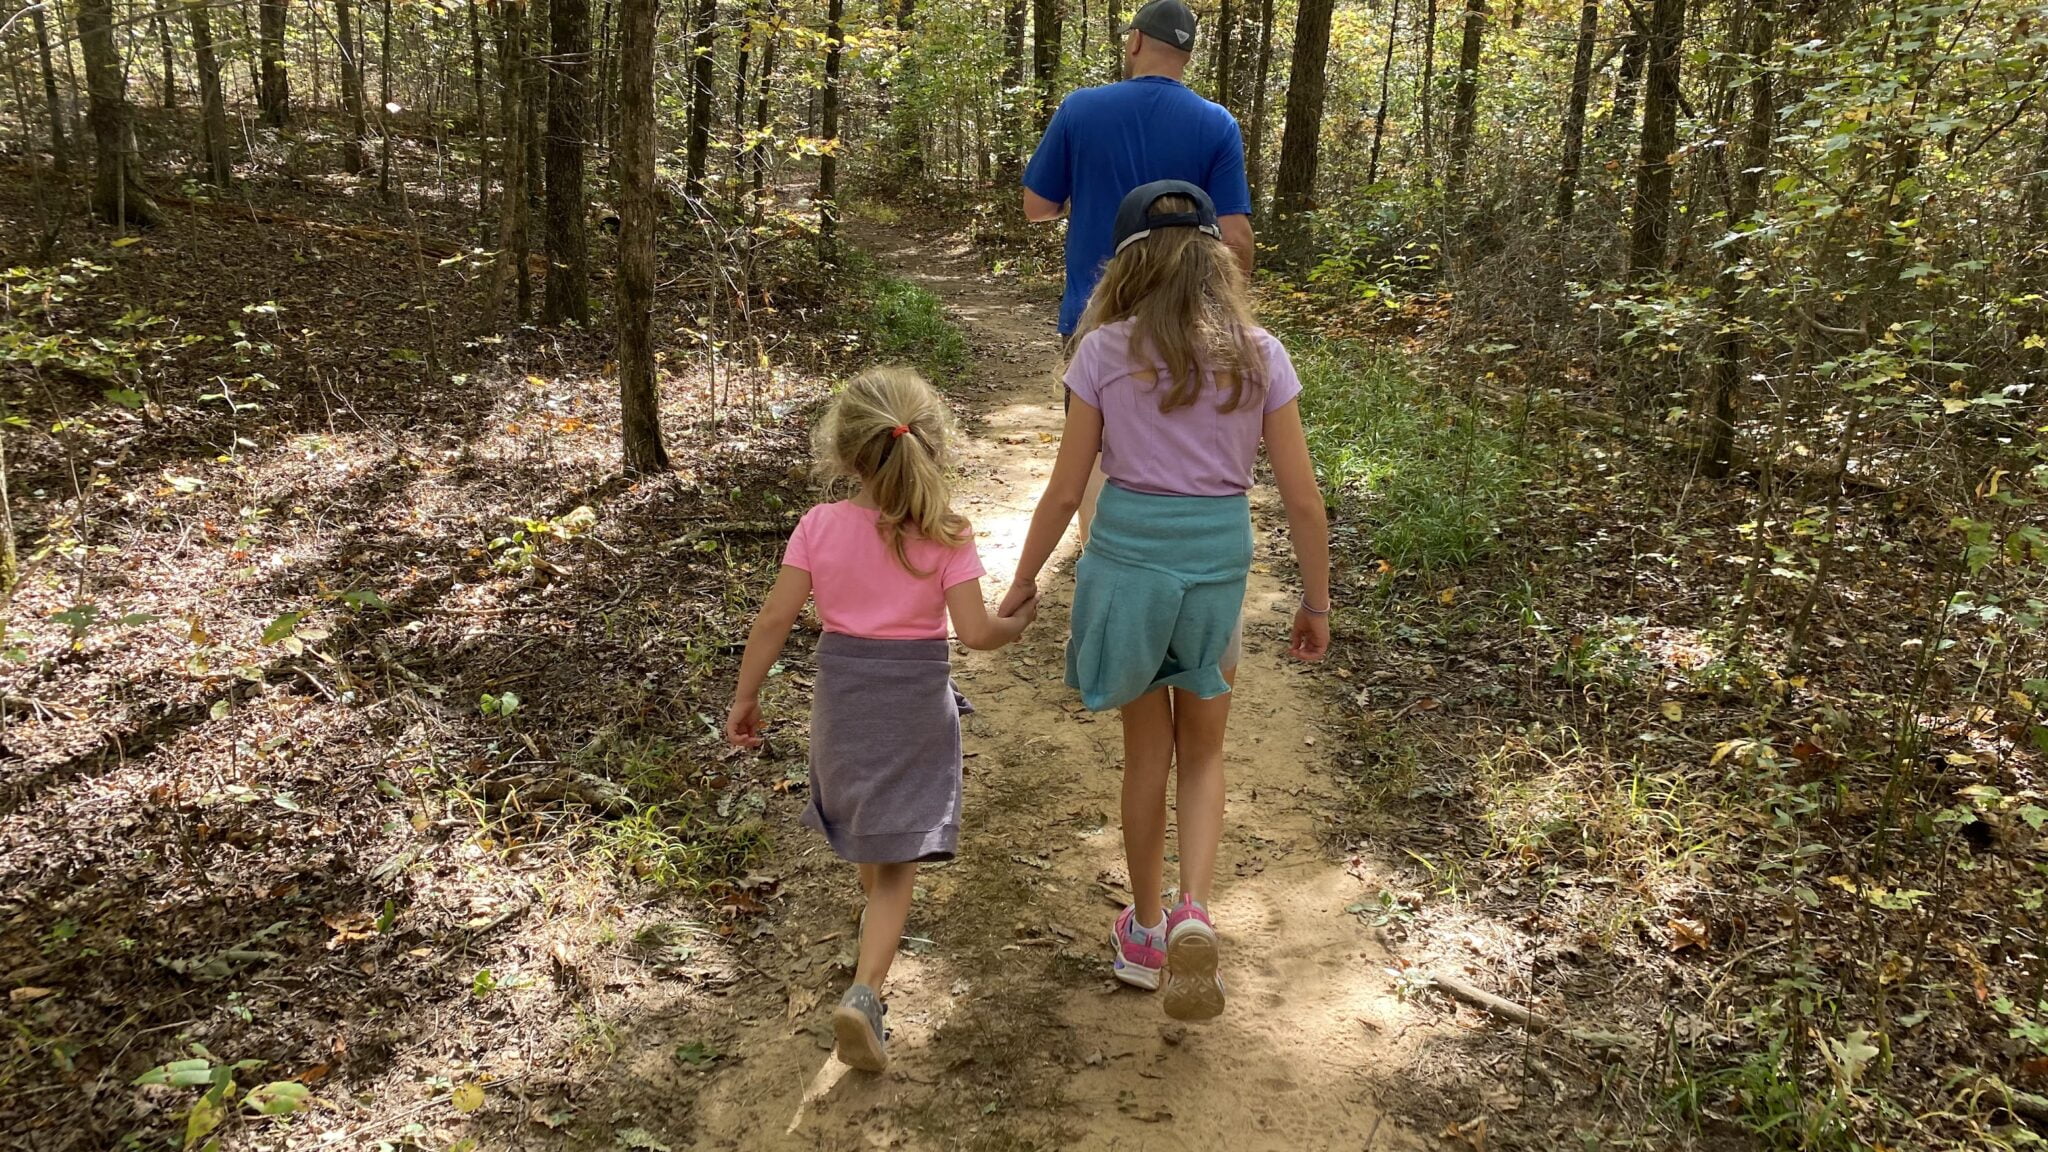 Branson MO Off the Beaten Path - Go Hiking in the Ozark Mountains